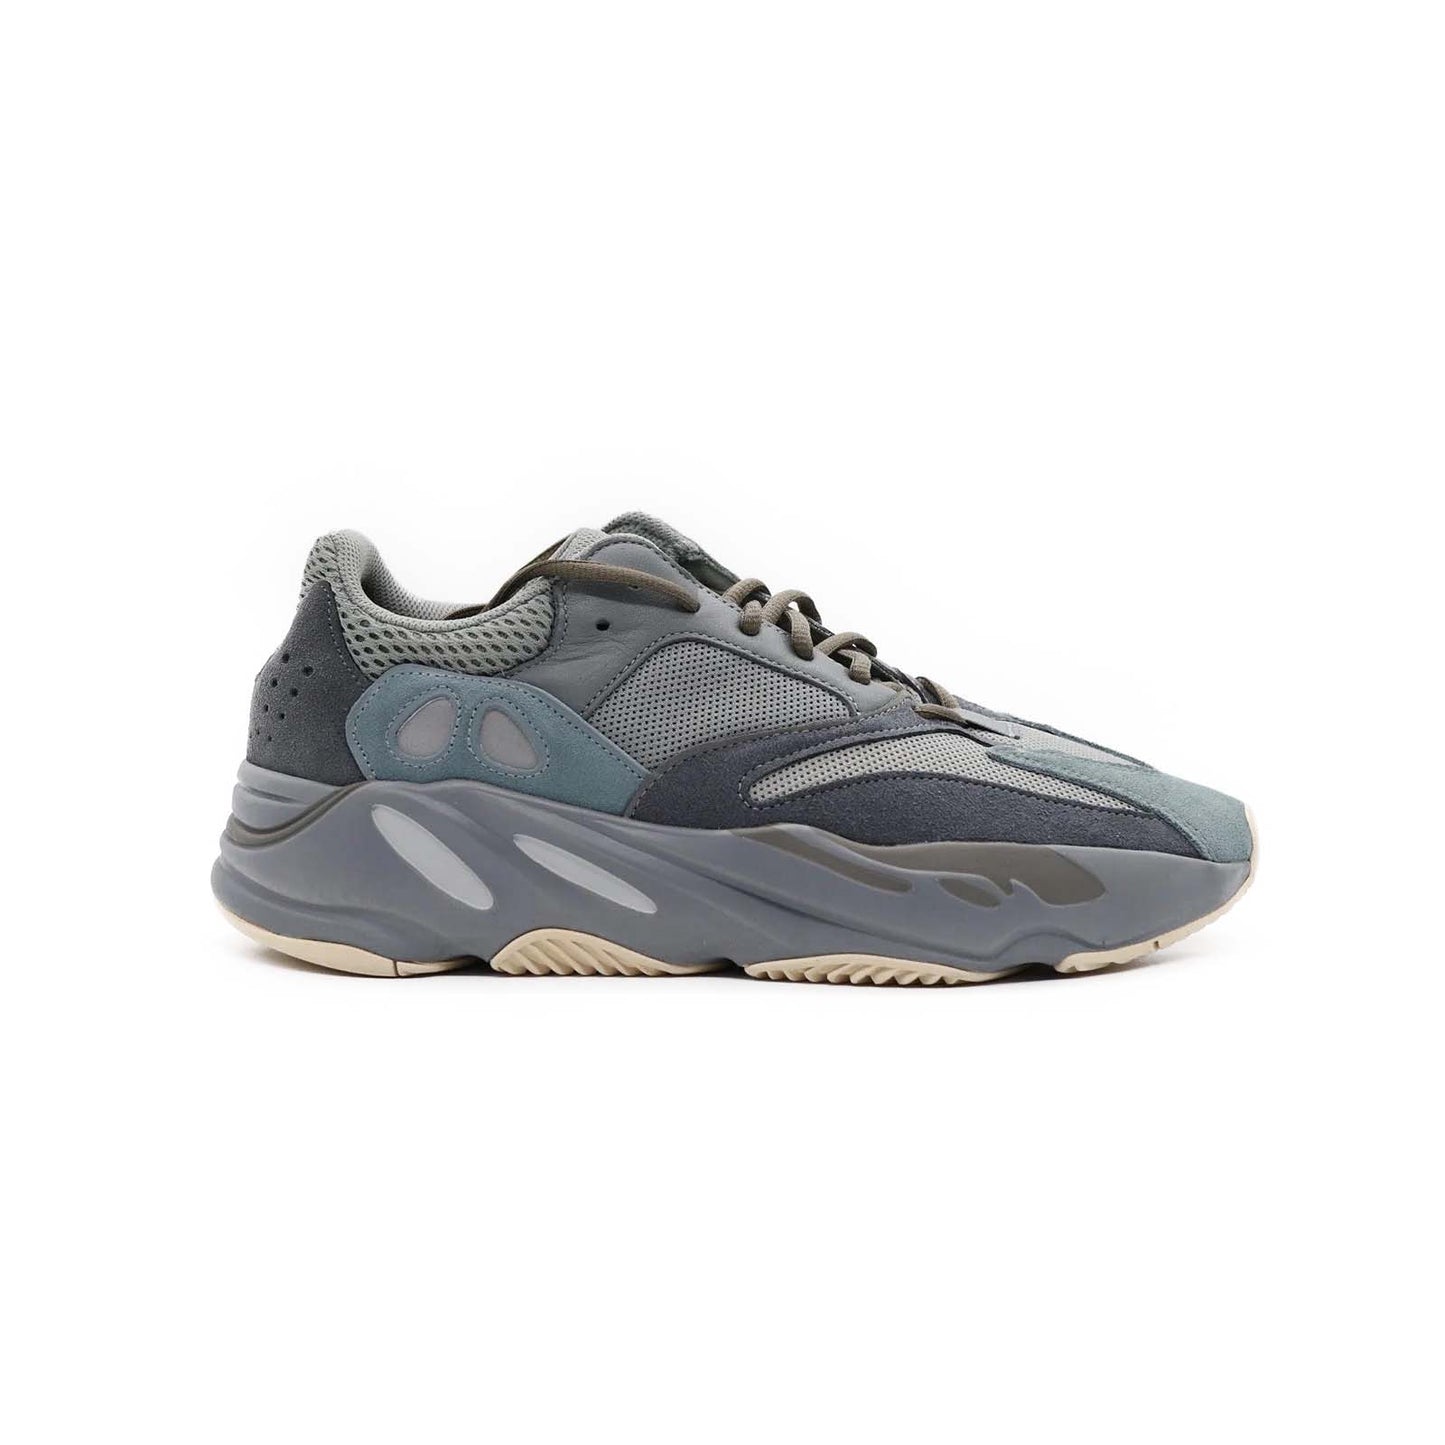 Yeezy Boost 700, Teal Blue